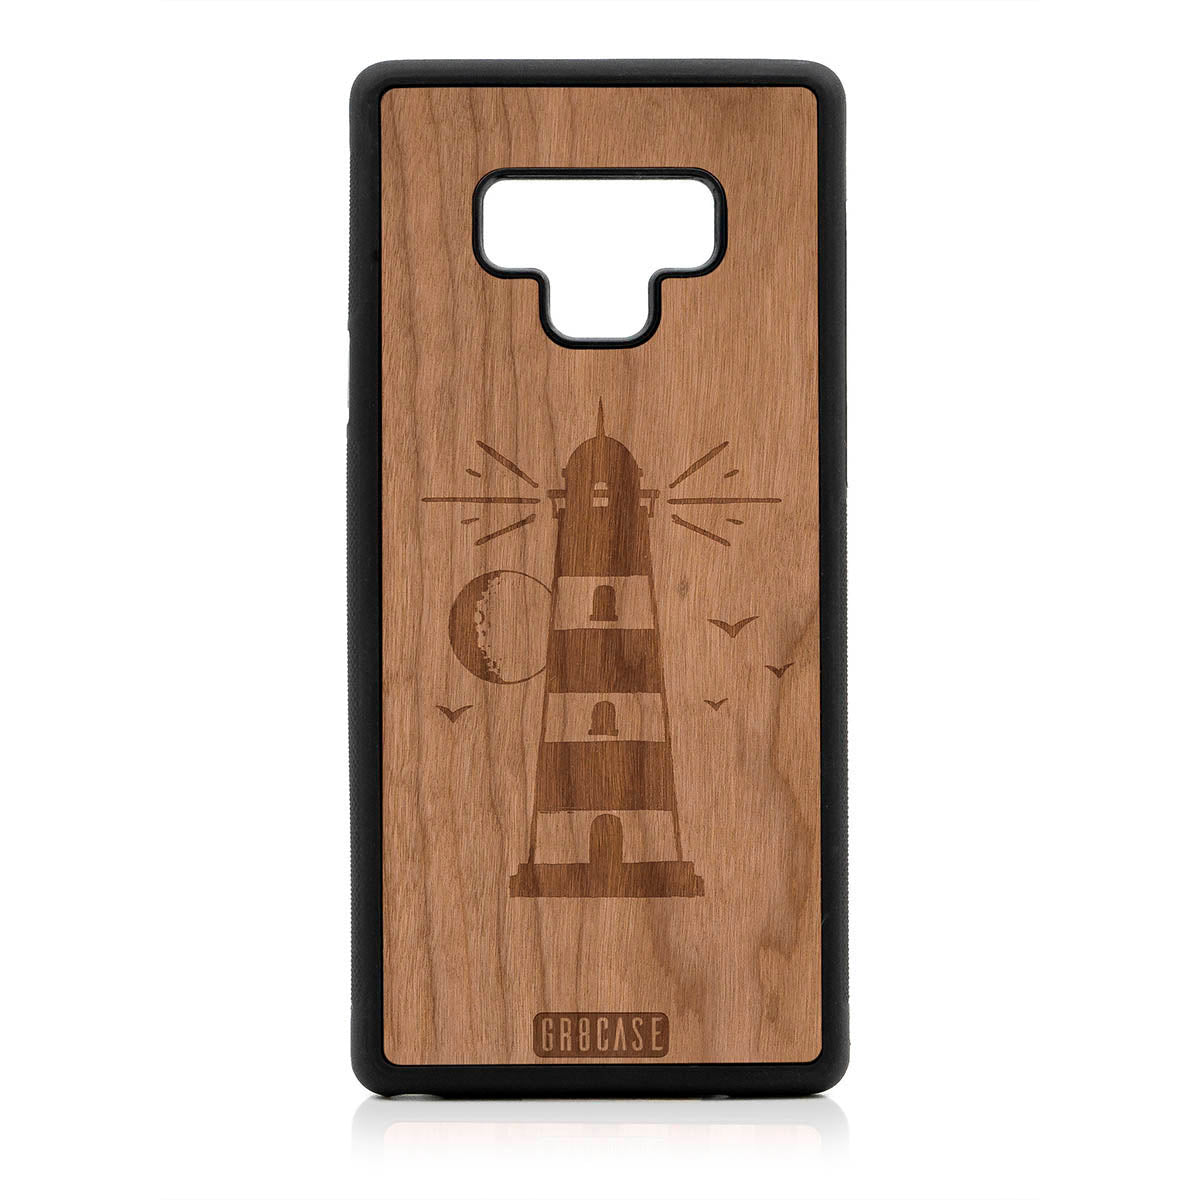 Midnight Lighthouse Design Wood Case For Samsung Galaxy Note 9